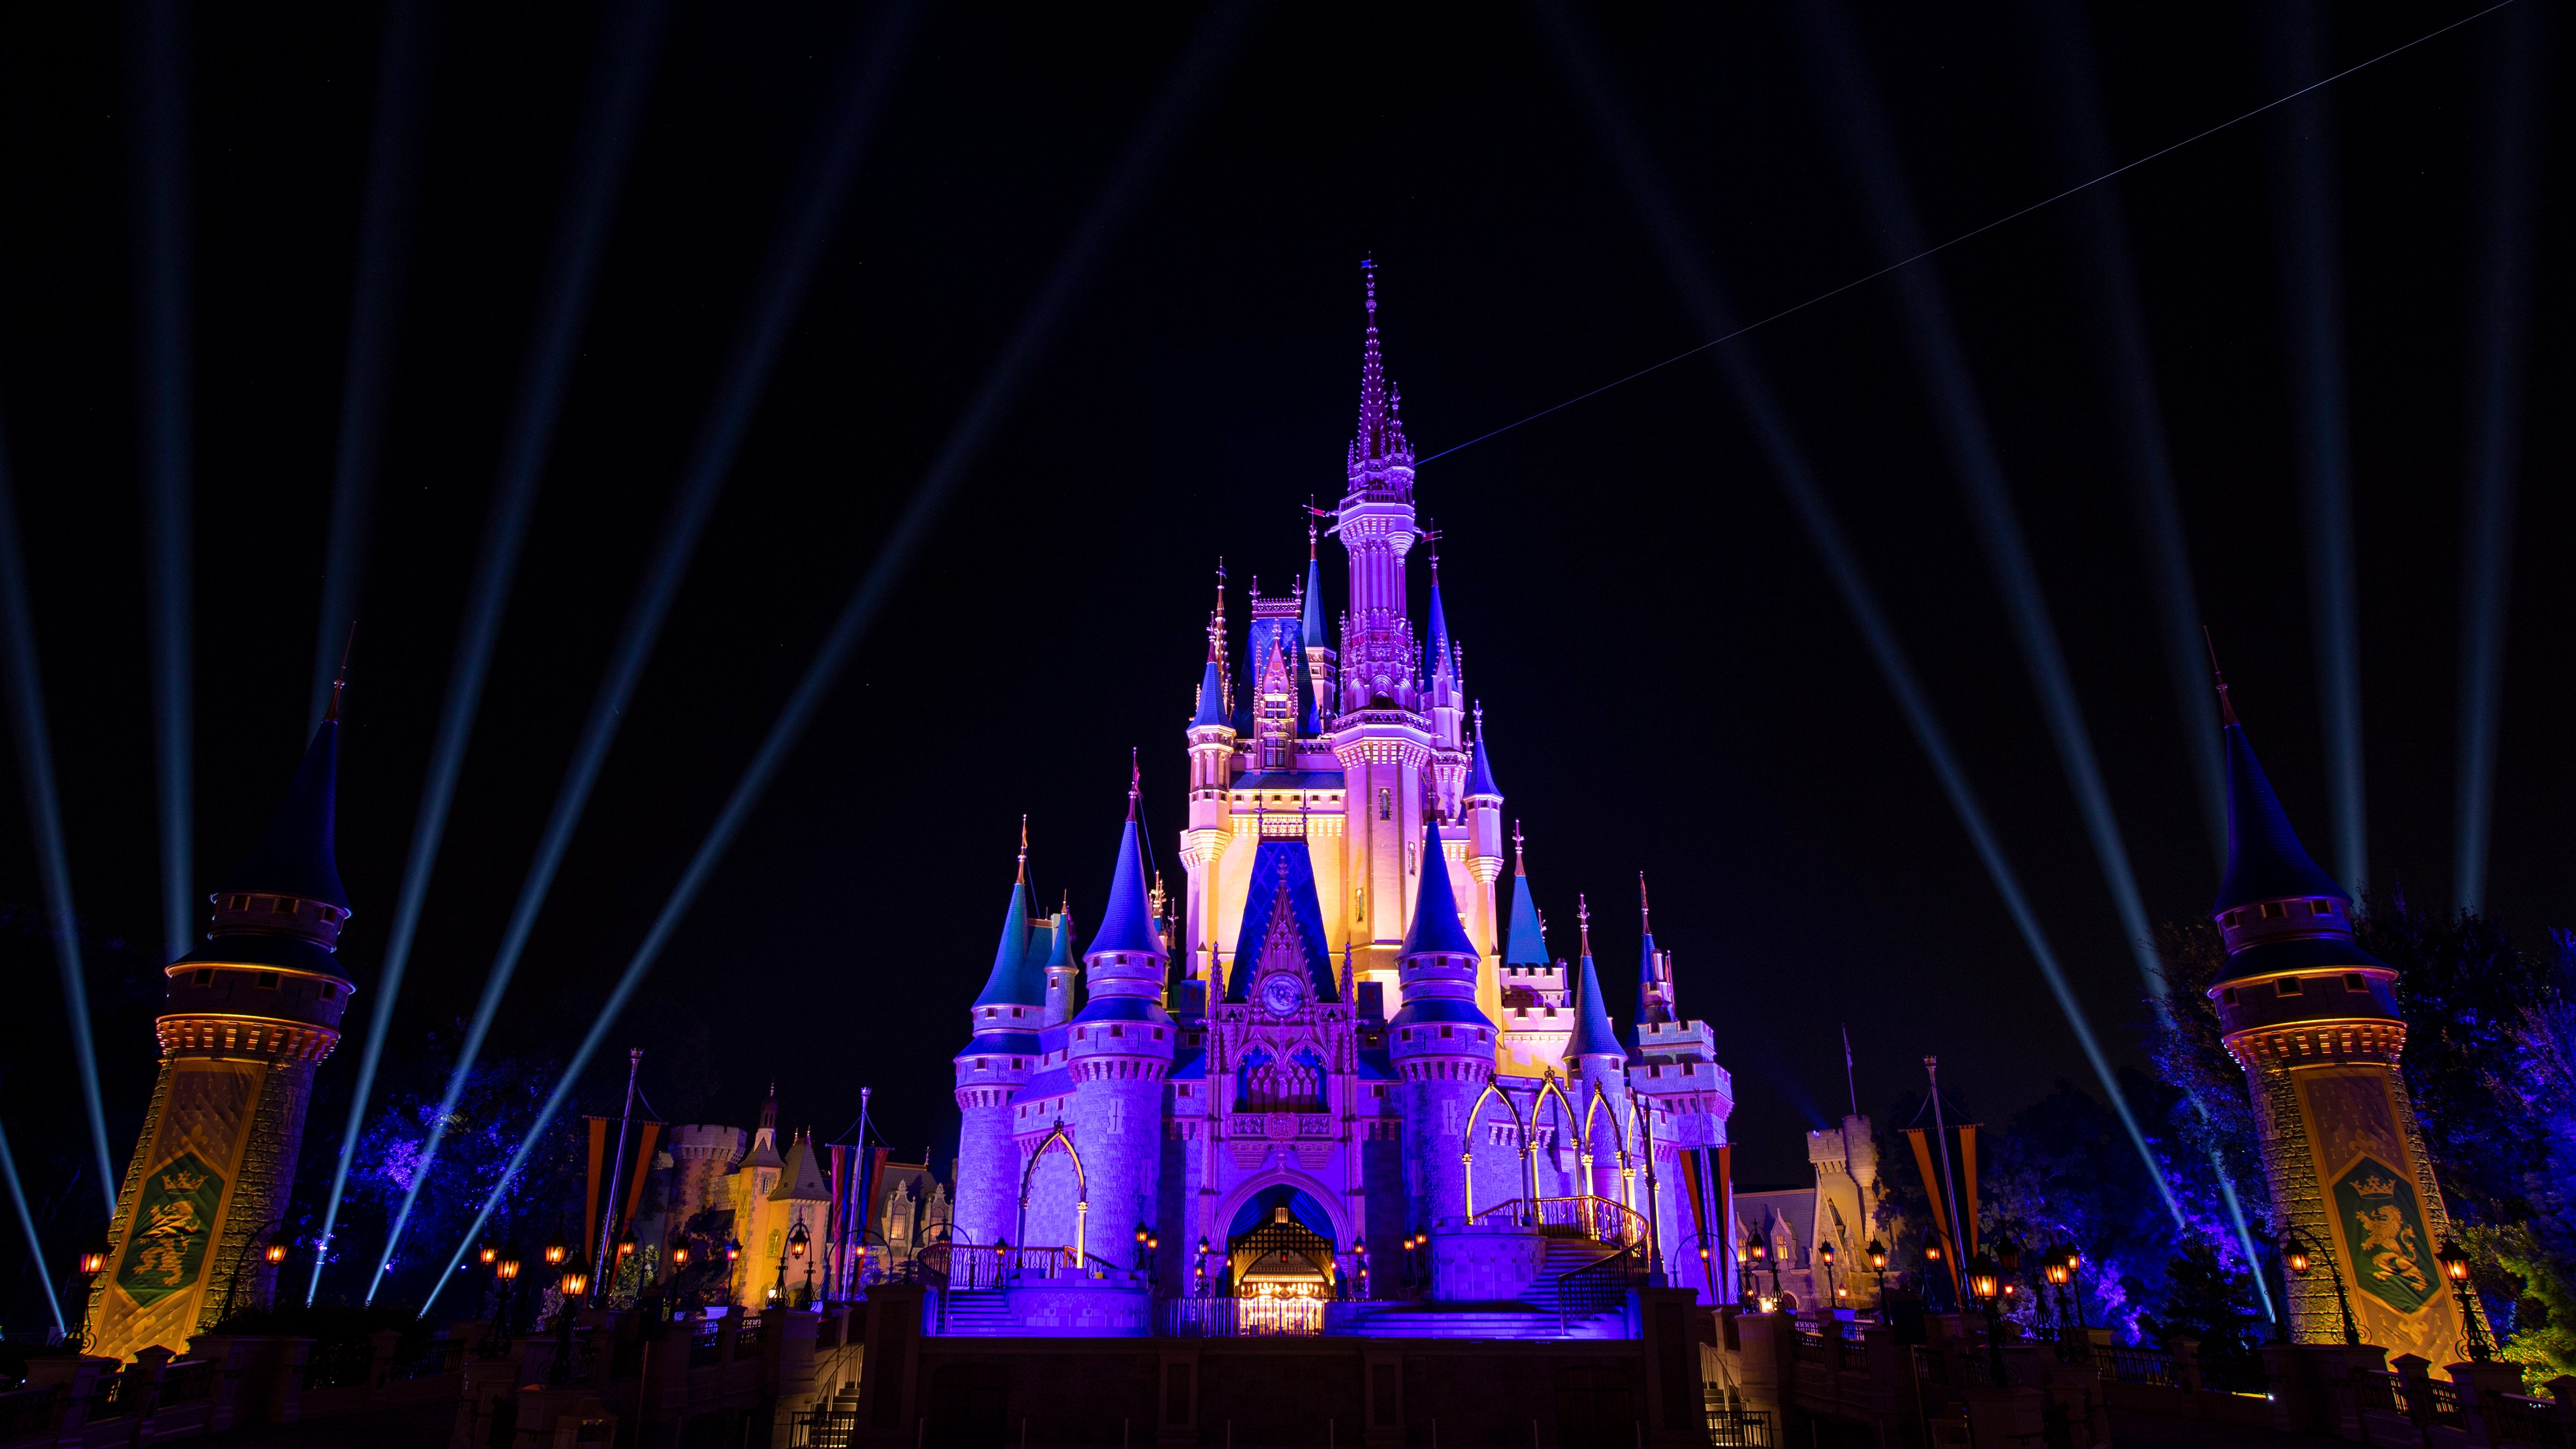 Disney World prices have risen sharply in the past 50 years